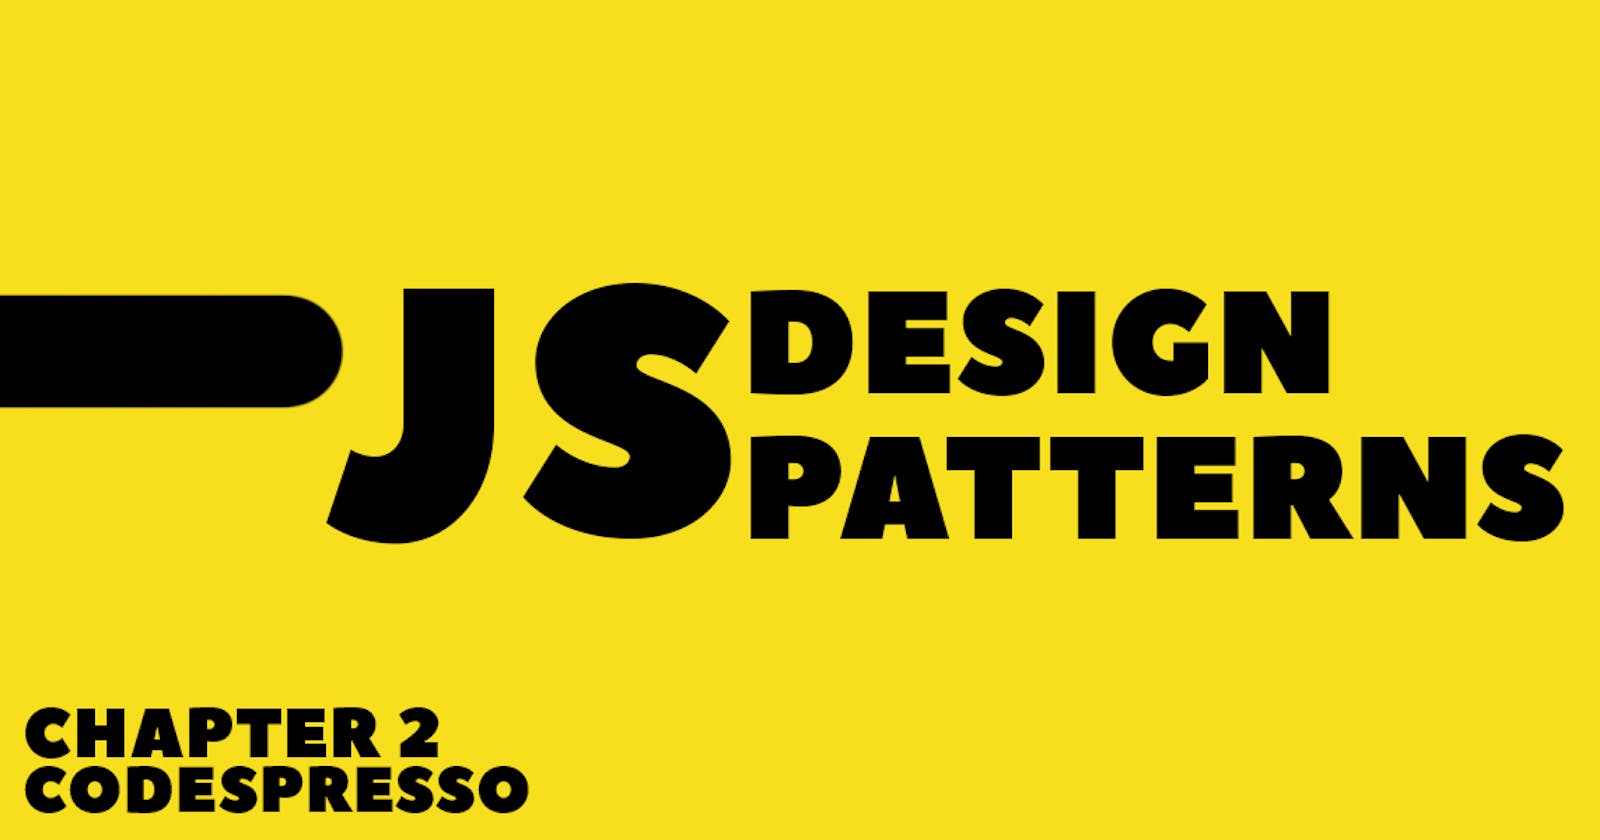 JS and Design patterns - Chapter 2 🚀